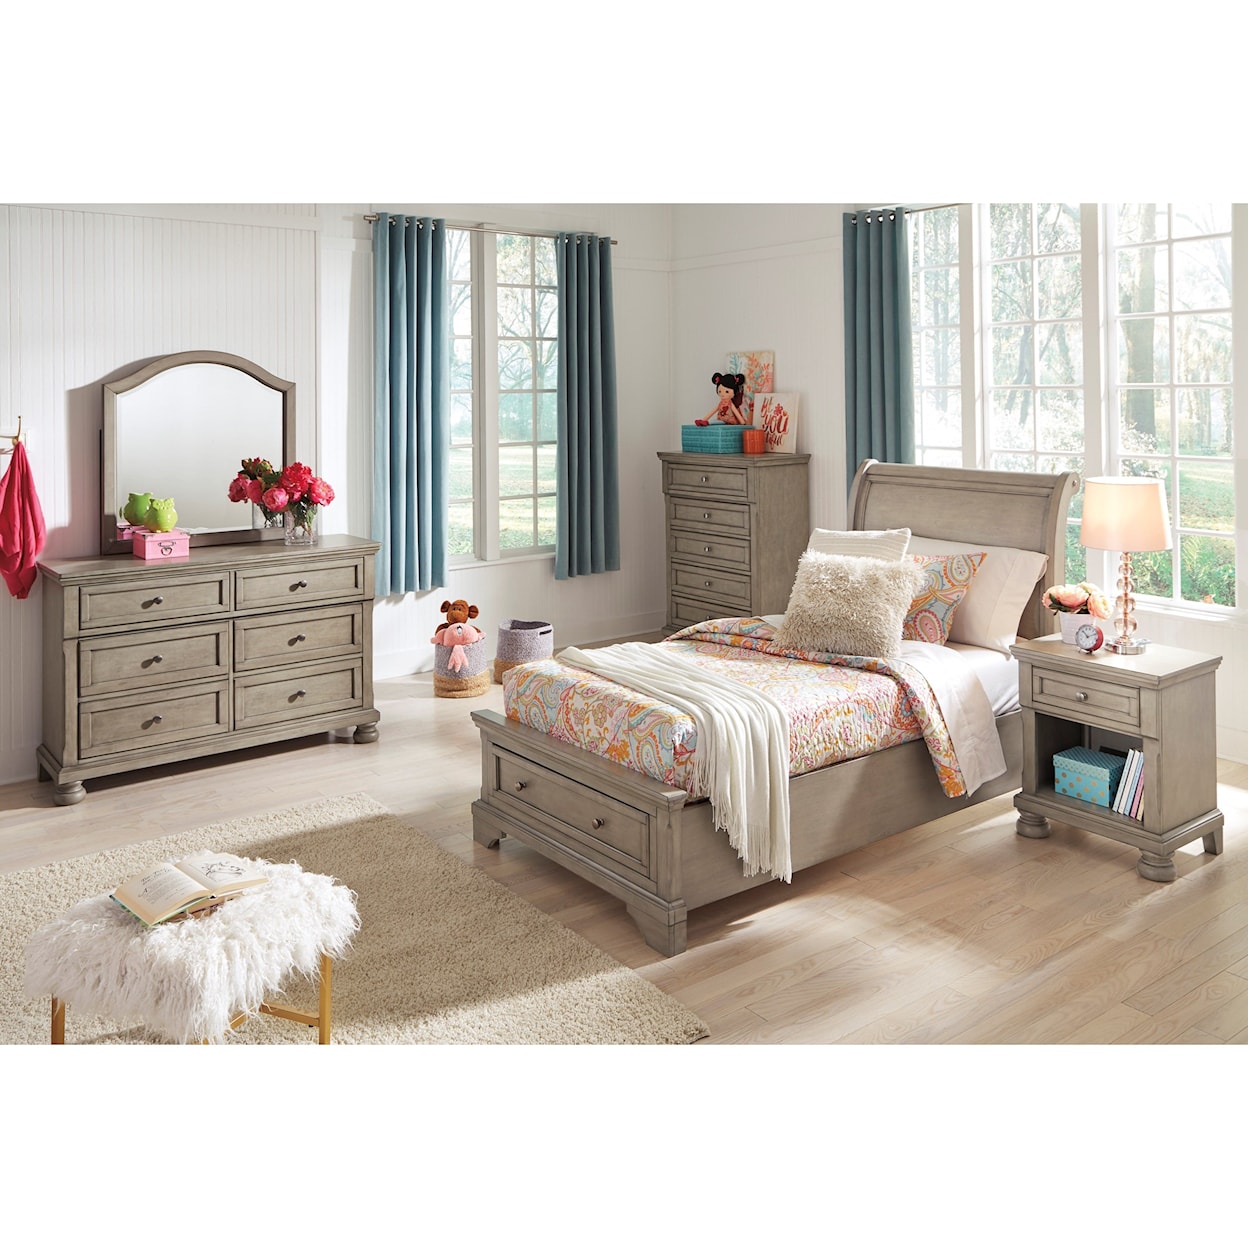 Signature Design by Ashley Lettner 6pc Full Bedroom Group